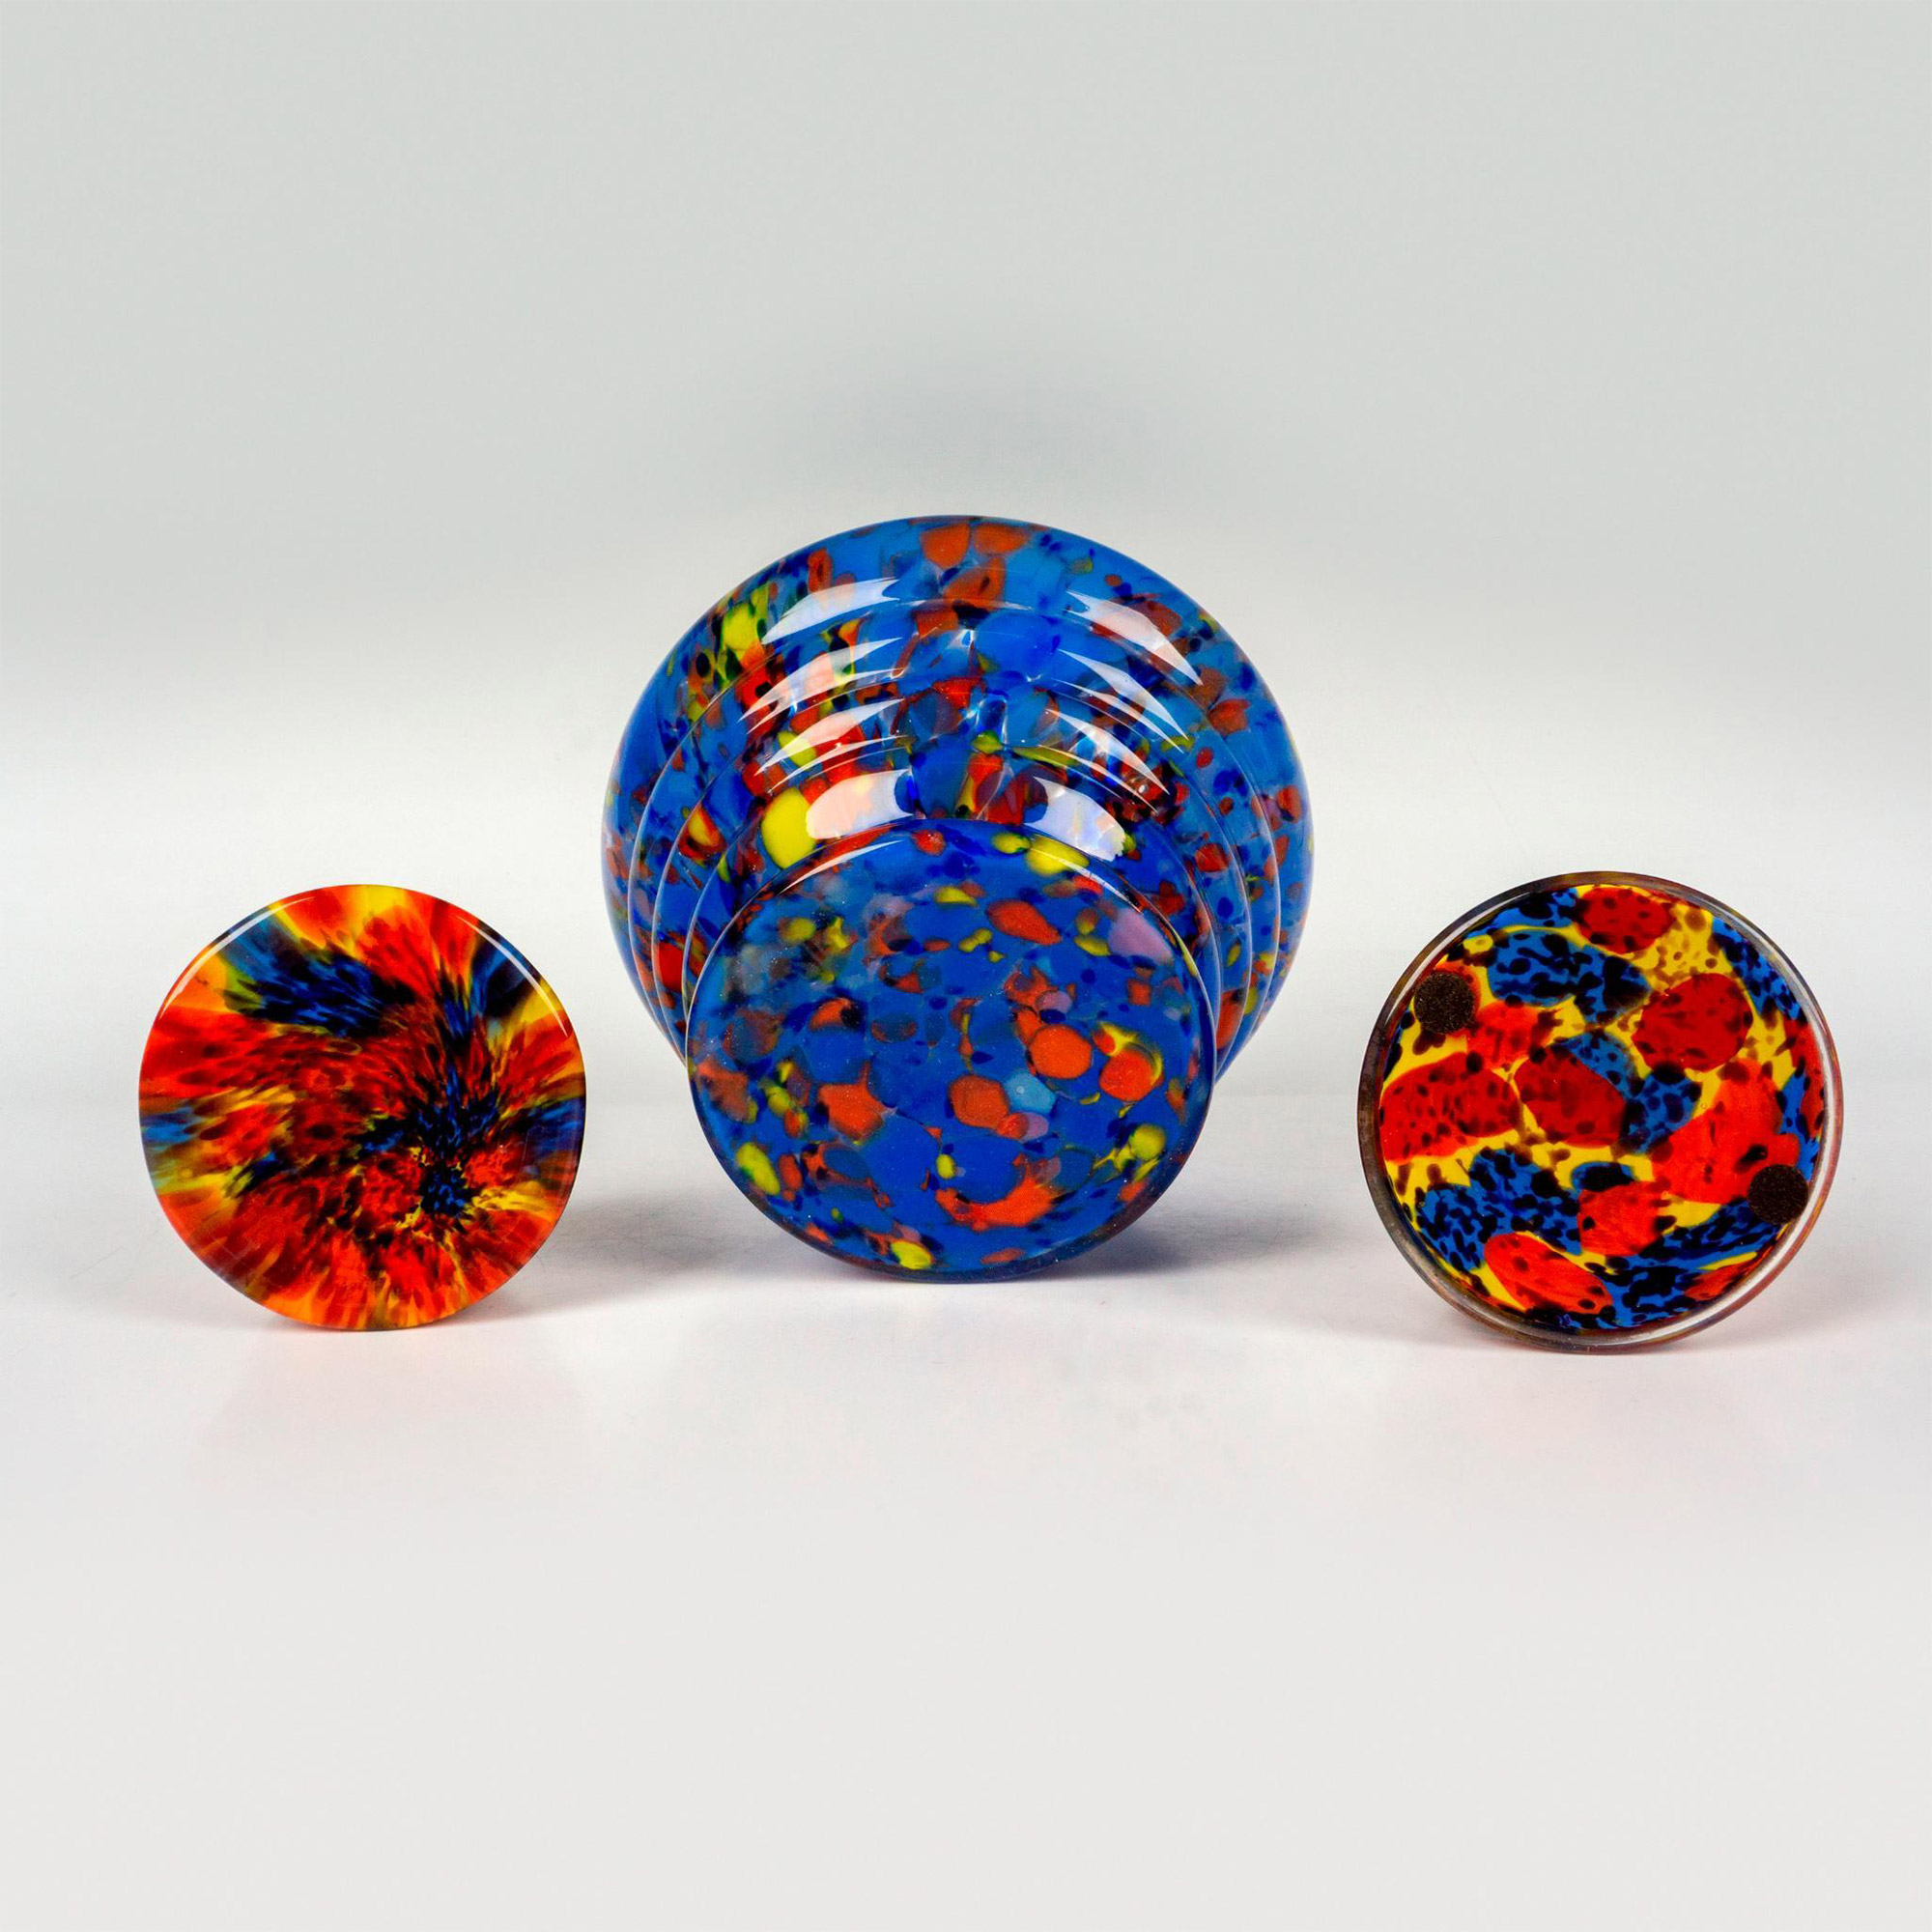 3pc Czech Art Glass Speckled Vases - Image 3 of 3